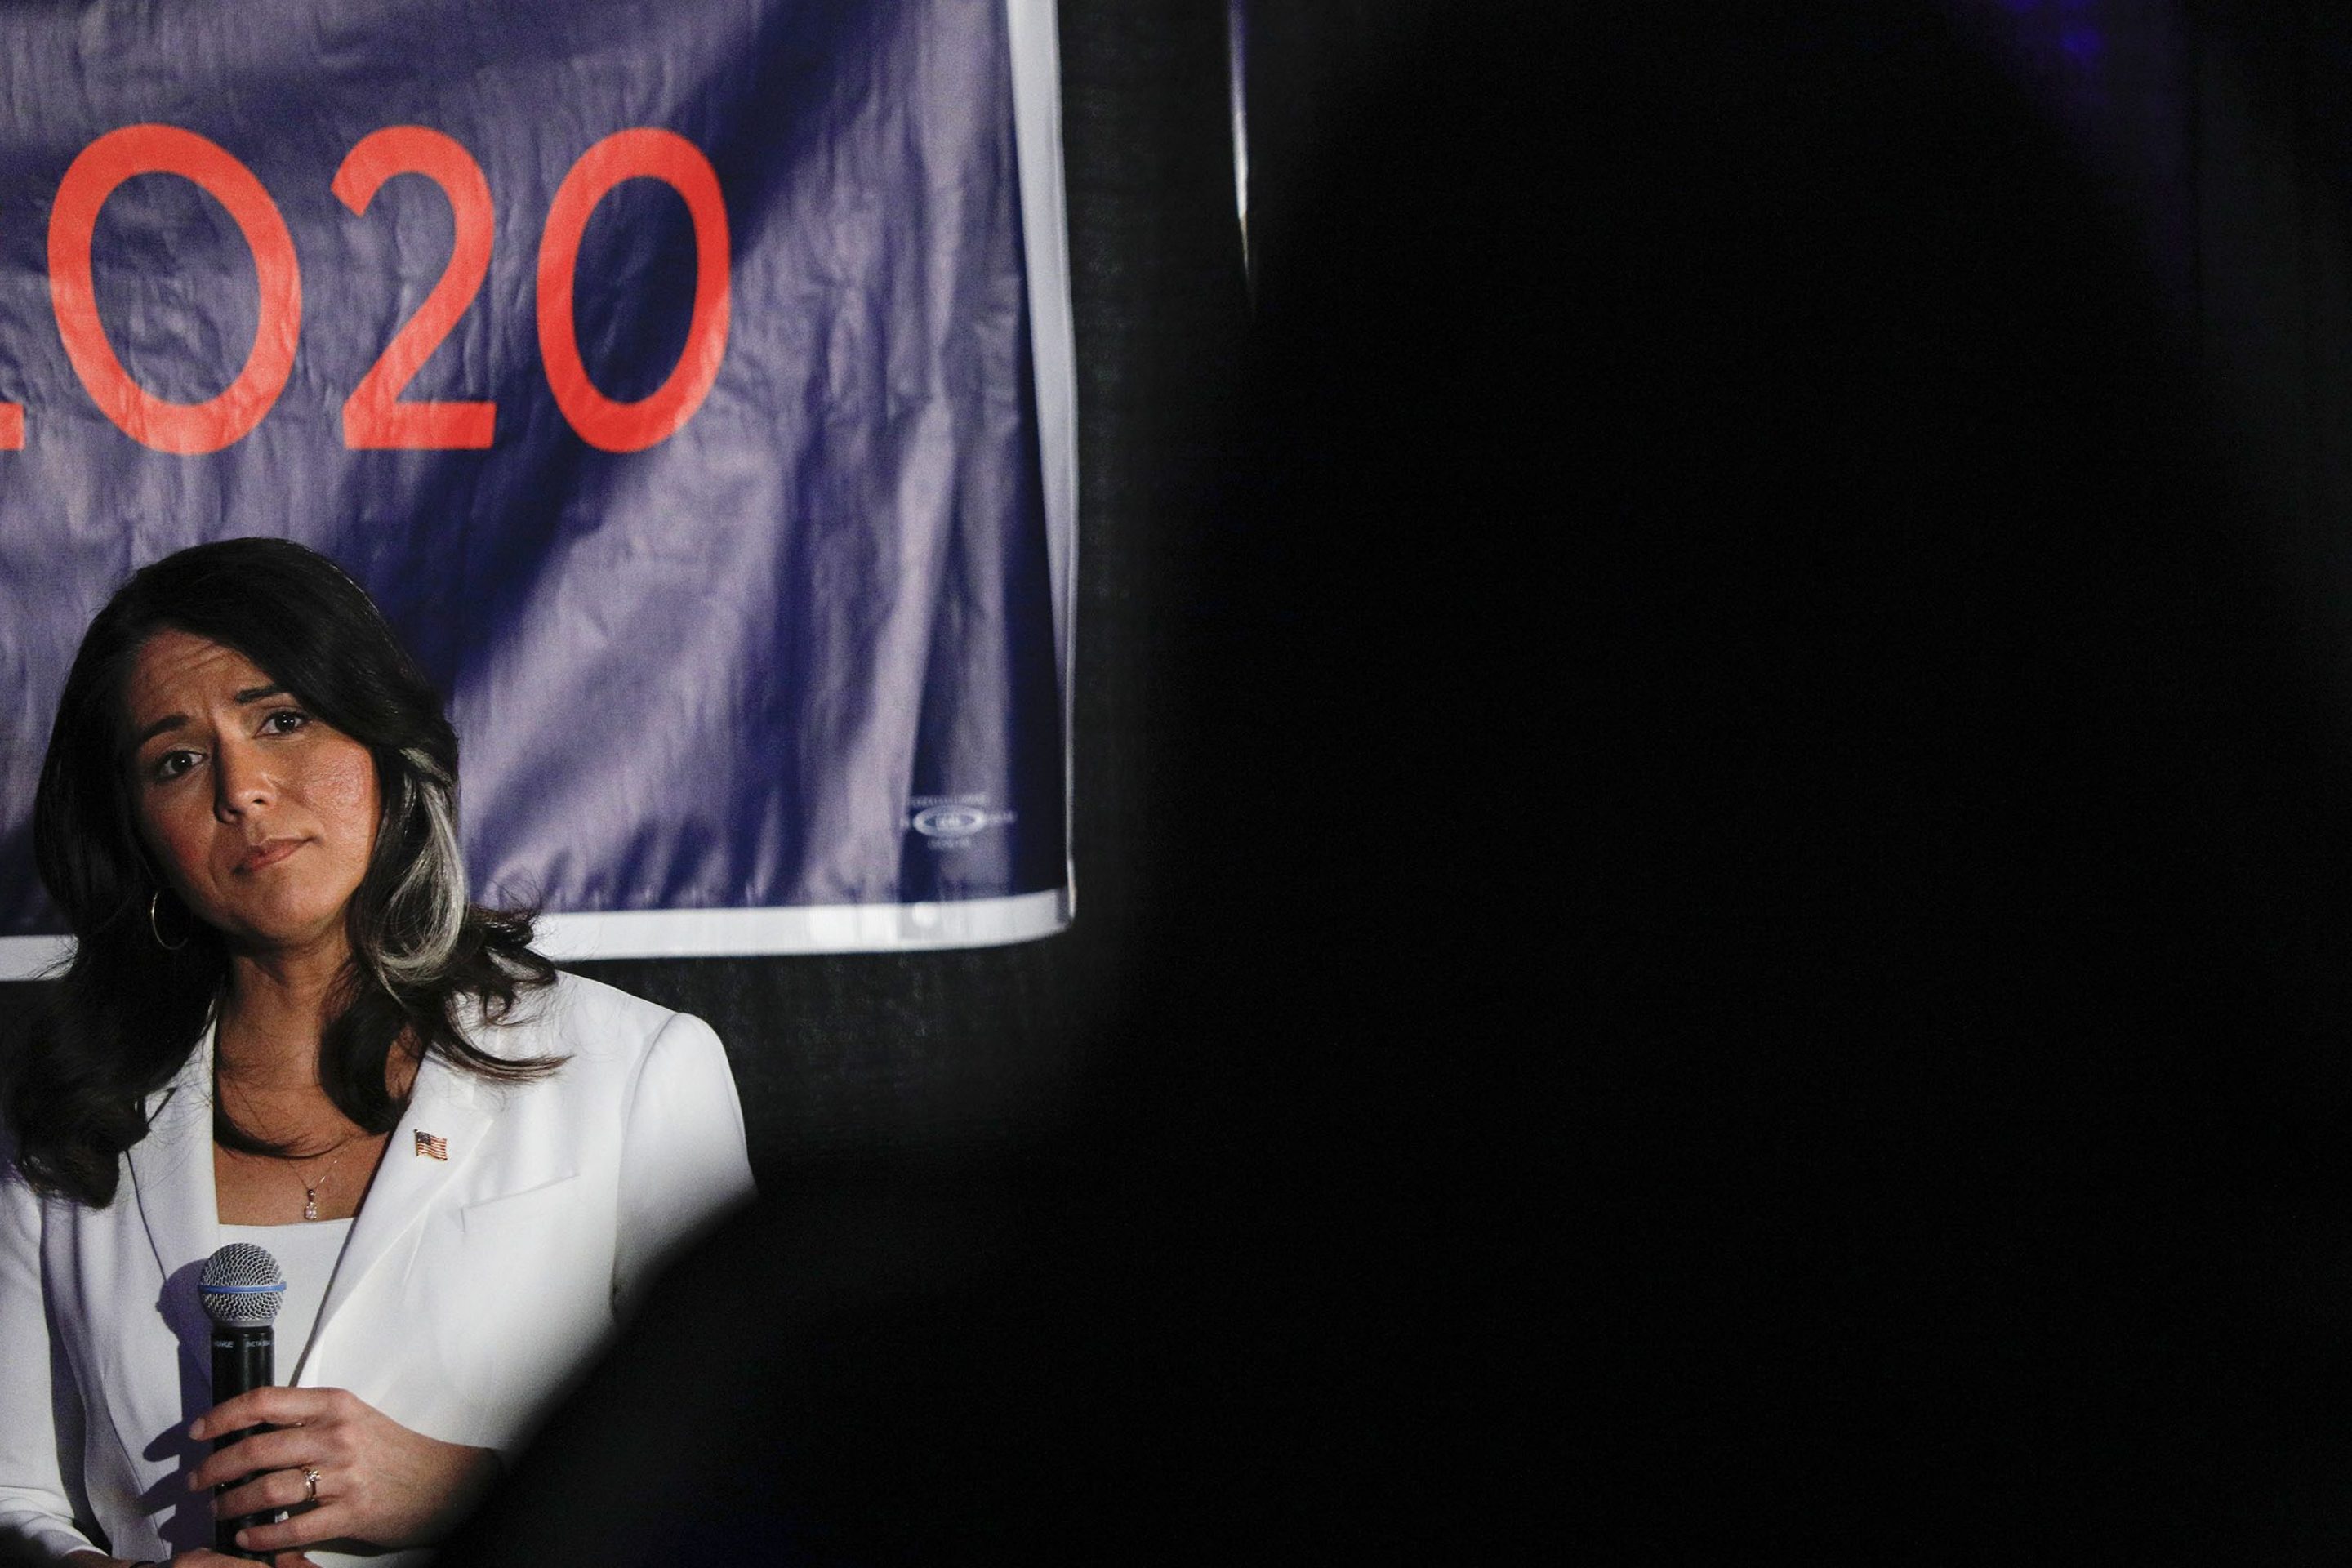 Democratic presidential candidate U.S. Representative Tulsi Gabbard (D-HI) listens to a question at a Town Hall meeting on Super Tuesday Primary night on March 3, 2020 in Detroit, Michigan.